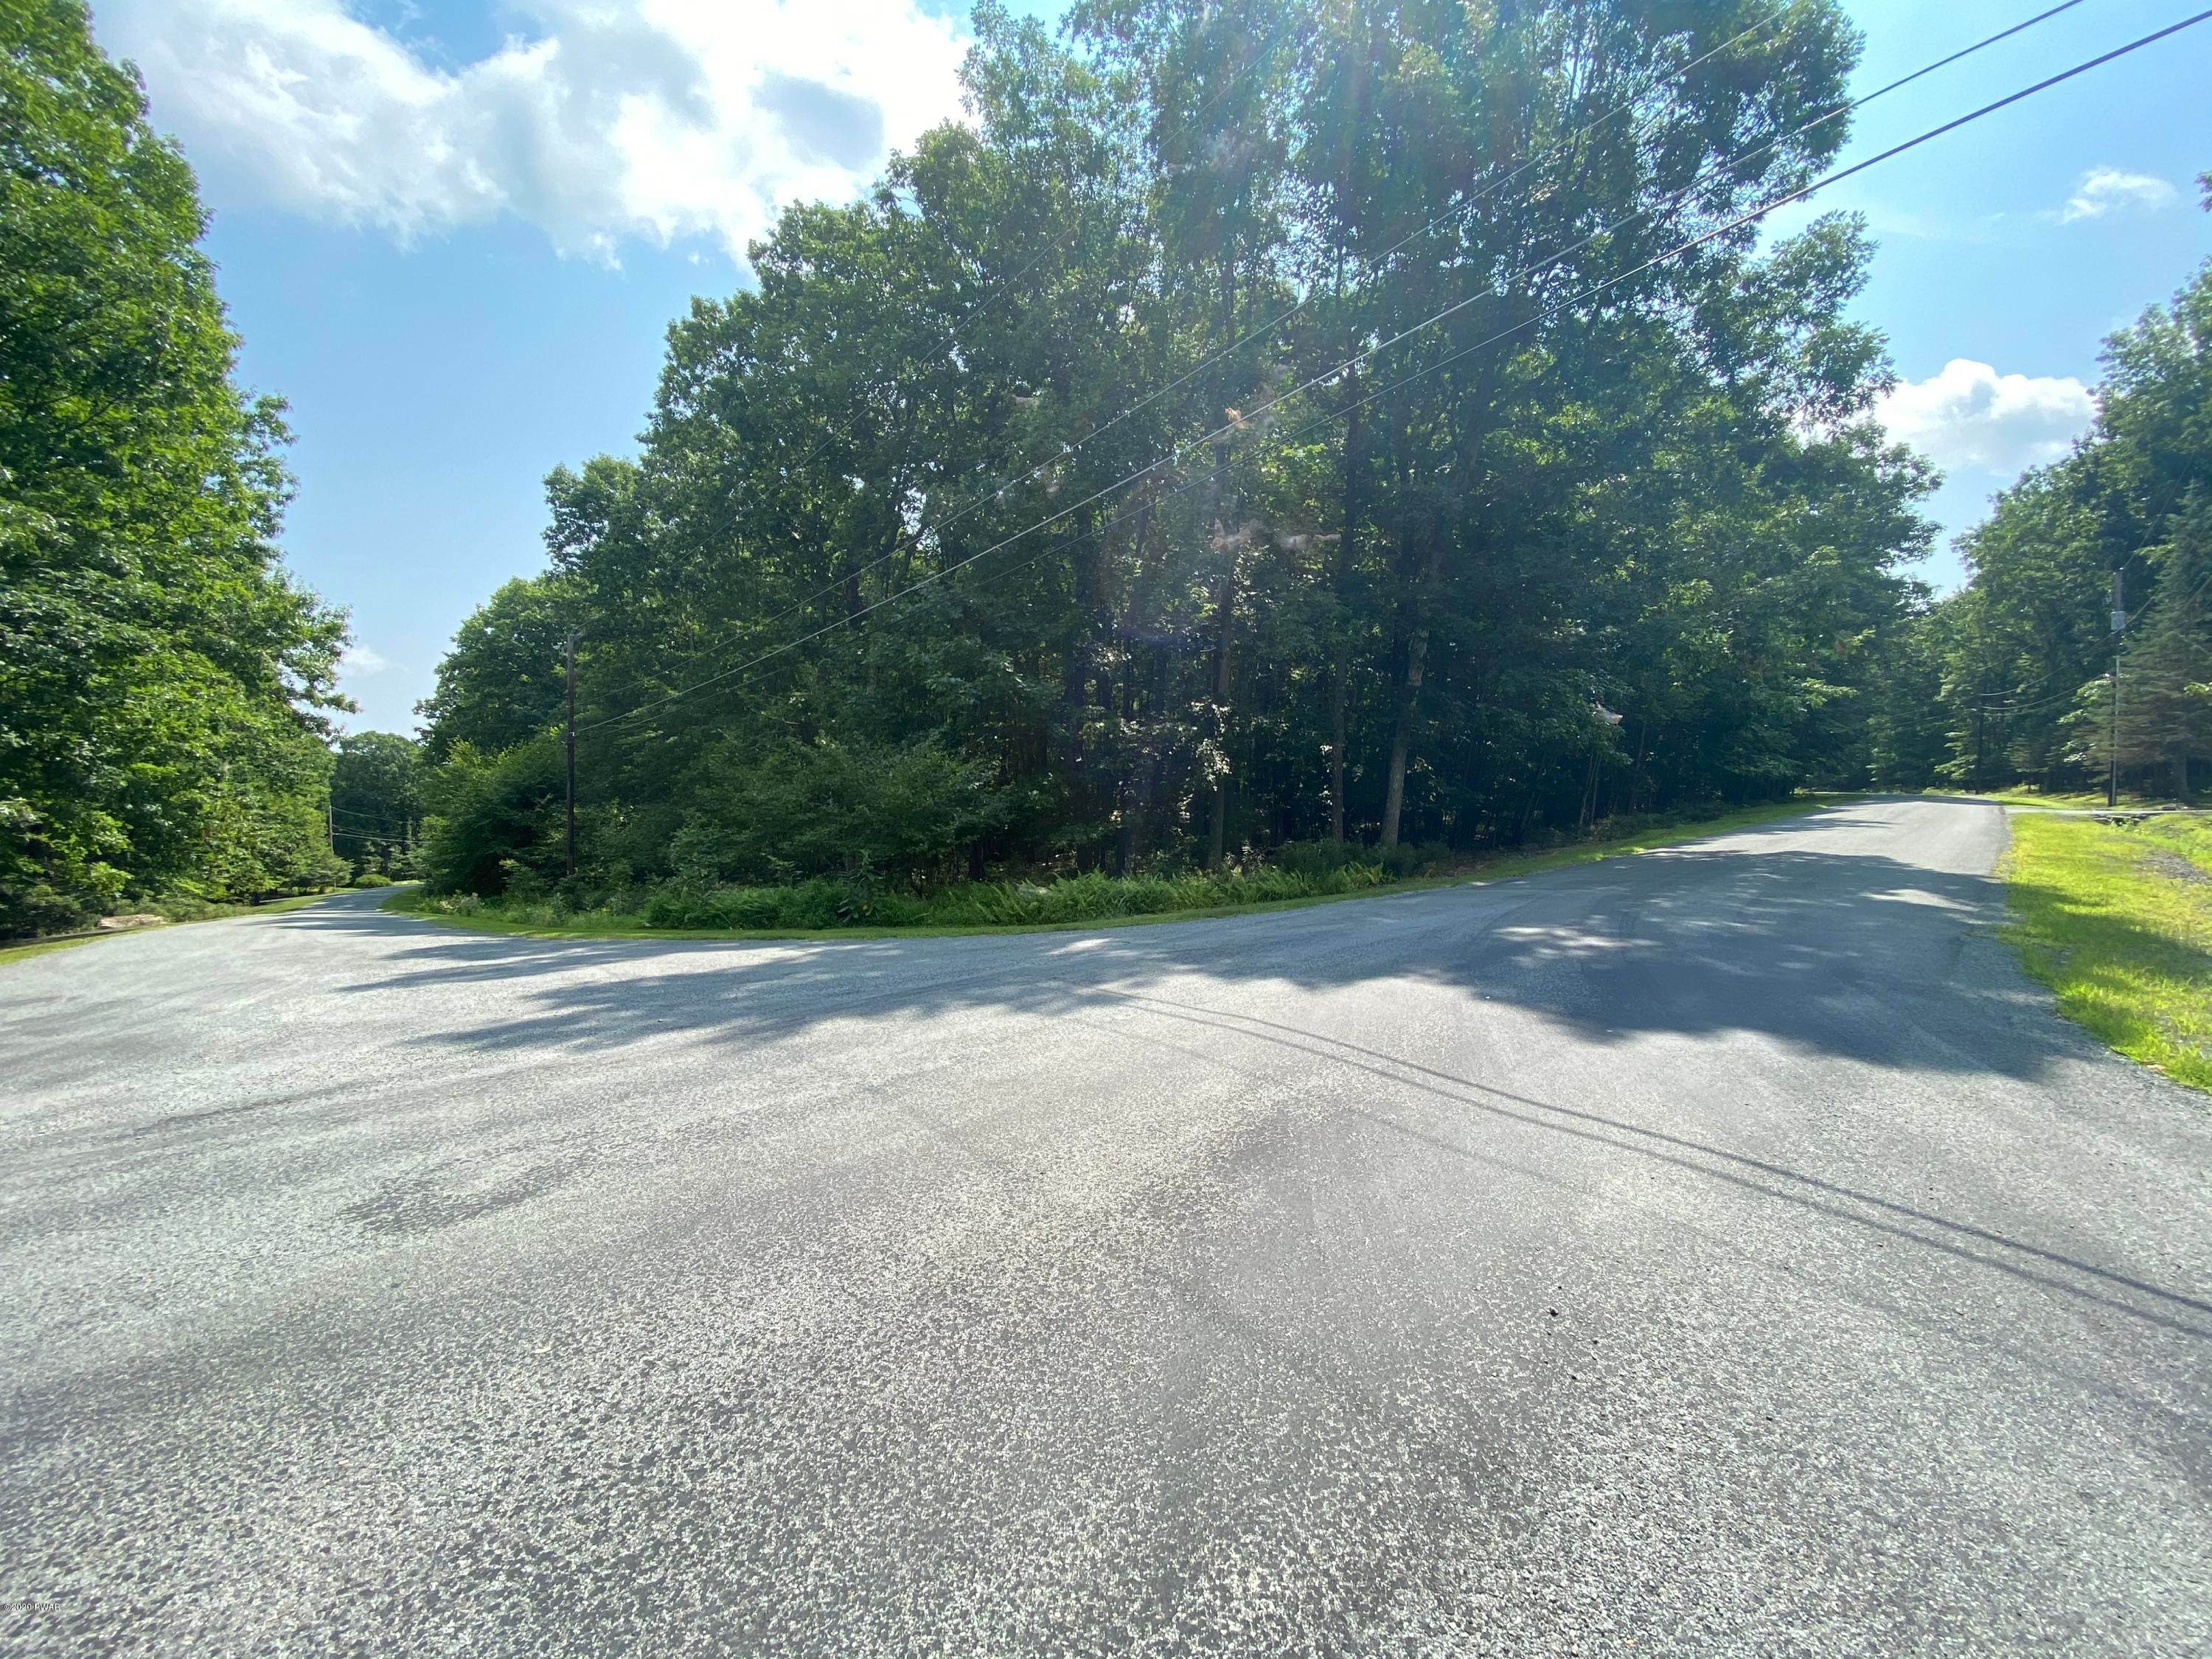 5. Land for Sale at 1020 1016 Acacia And Sierra Dr Hawley, Pennsylvania 18428 United States